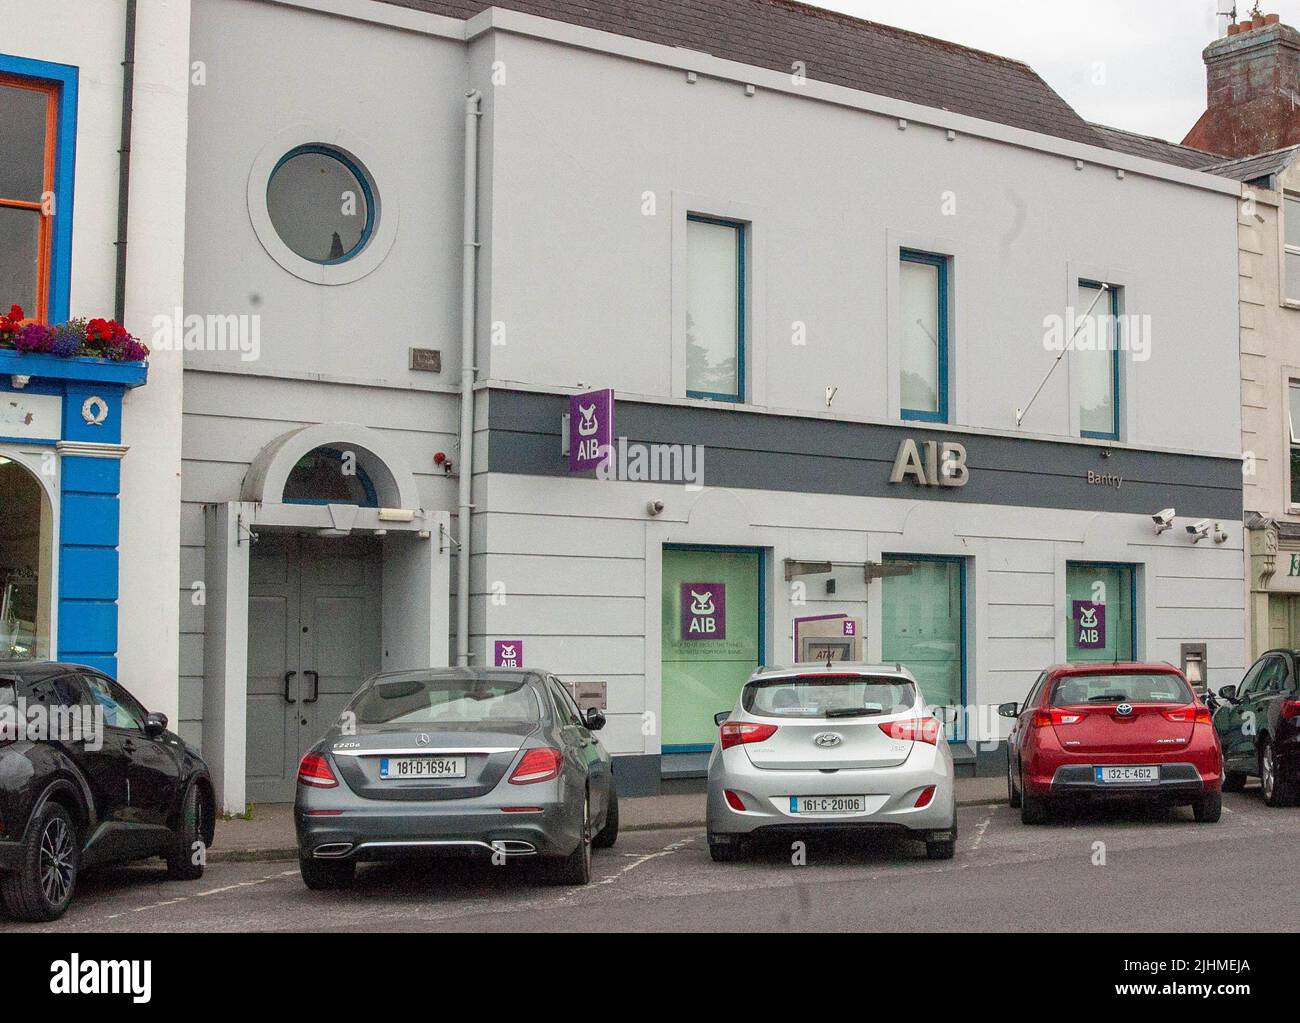 Bantry West Cork Ireland,  Tuesday 19 Jul 2022; AIB has announced  that it is to make 70 branches nation wide., cashless. These include Castletownbere, Kinsale, Dunmanway and 9 other branches in Cork. The bank, which is to expand it's business with An Post,  has said, however, that no branches are going to close. West Cork TD, Michael Collins(IND) has said this is a retrograde step by AIB HQ to Our rural towns and branches and to their staff and customers. Credit; ED/Alamy Live News Stock Photo